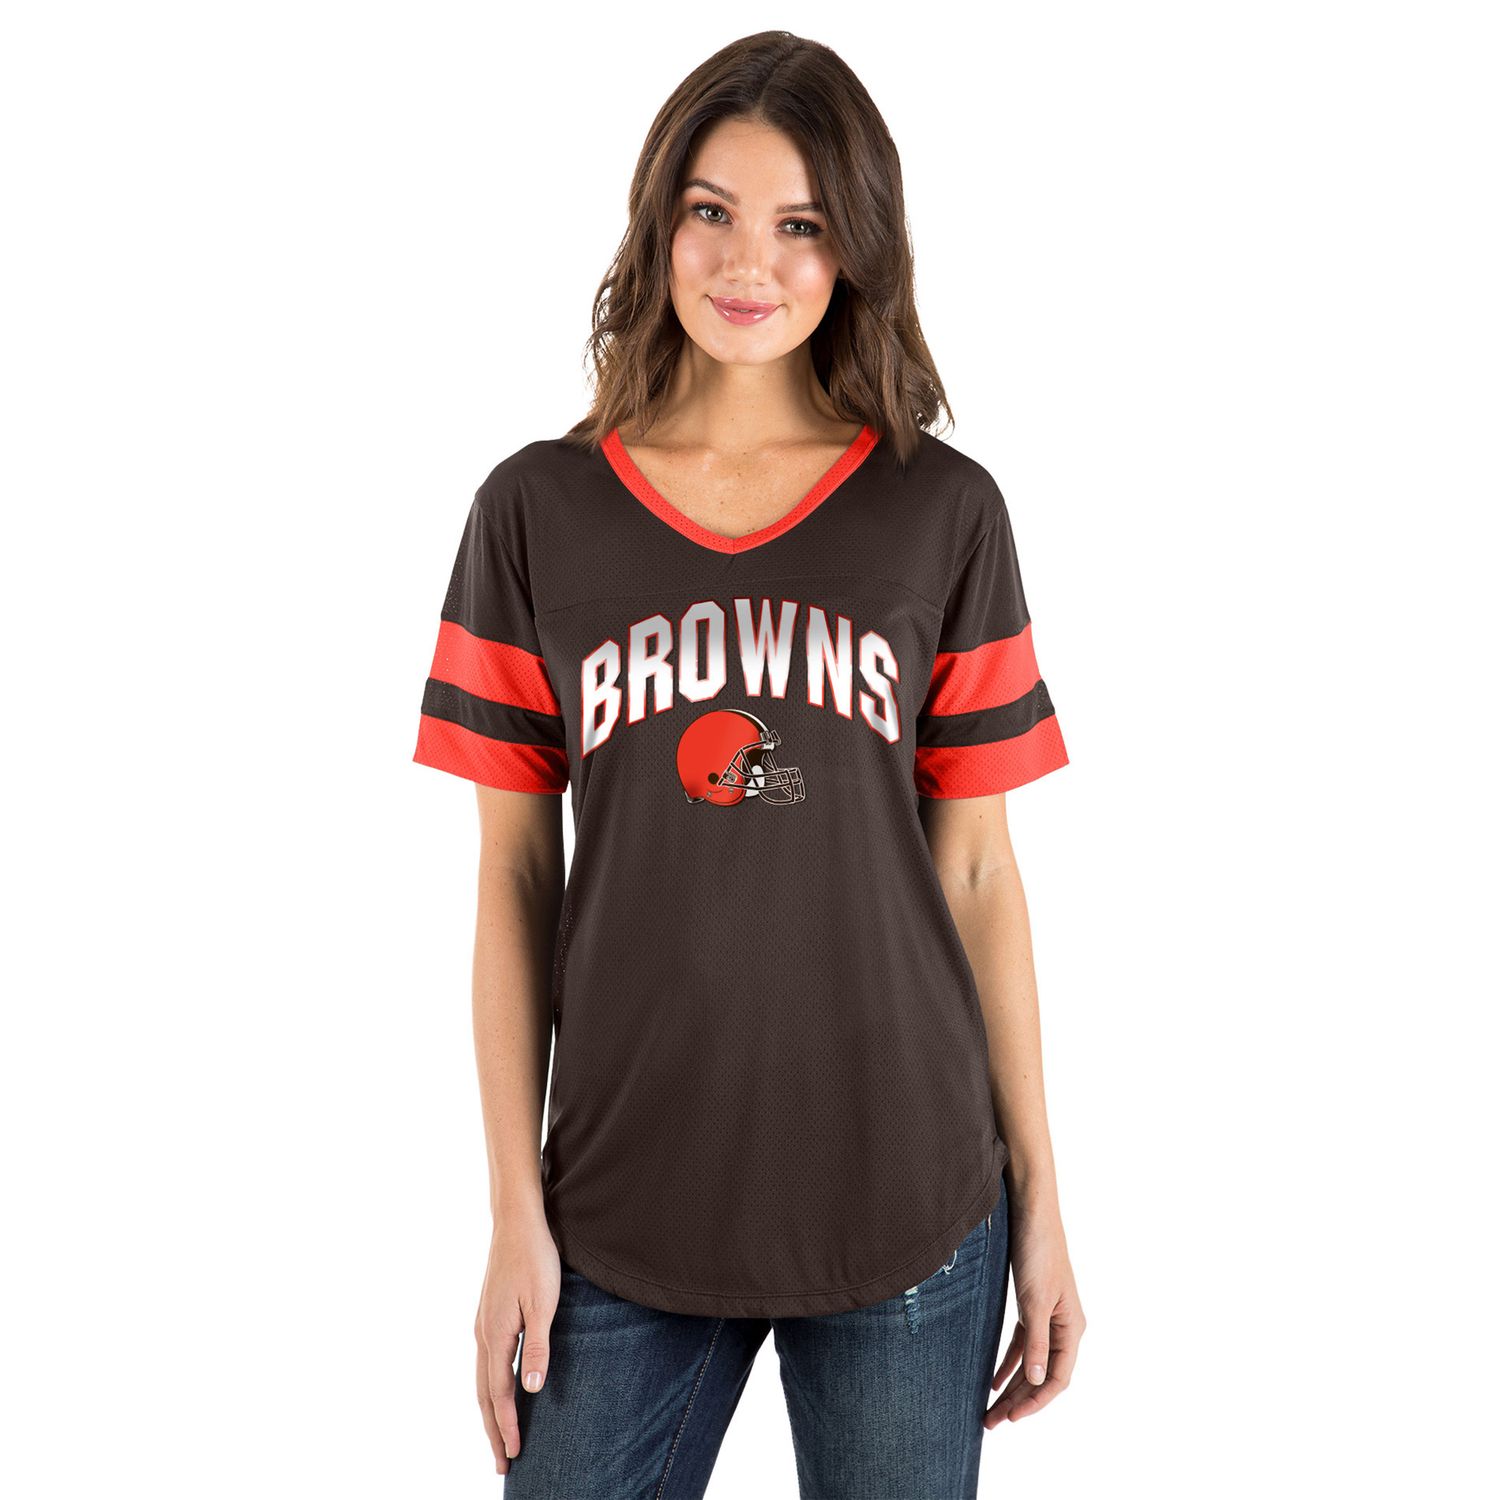 womens cleveland browns jersey